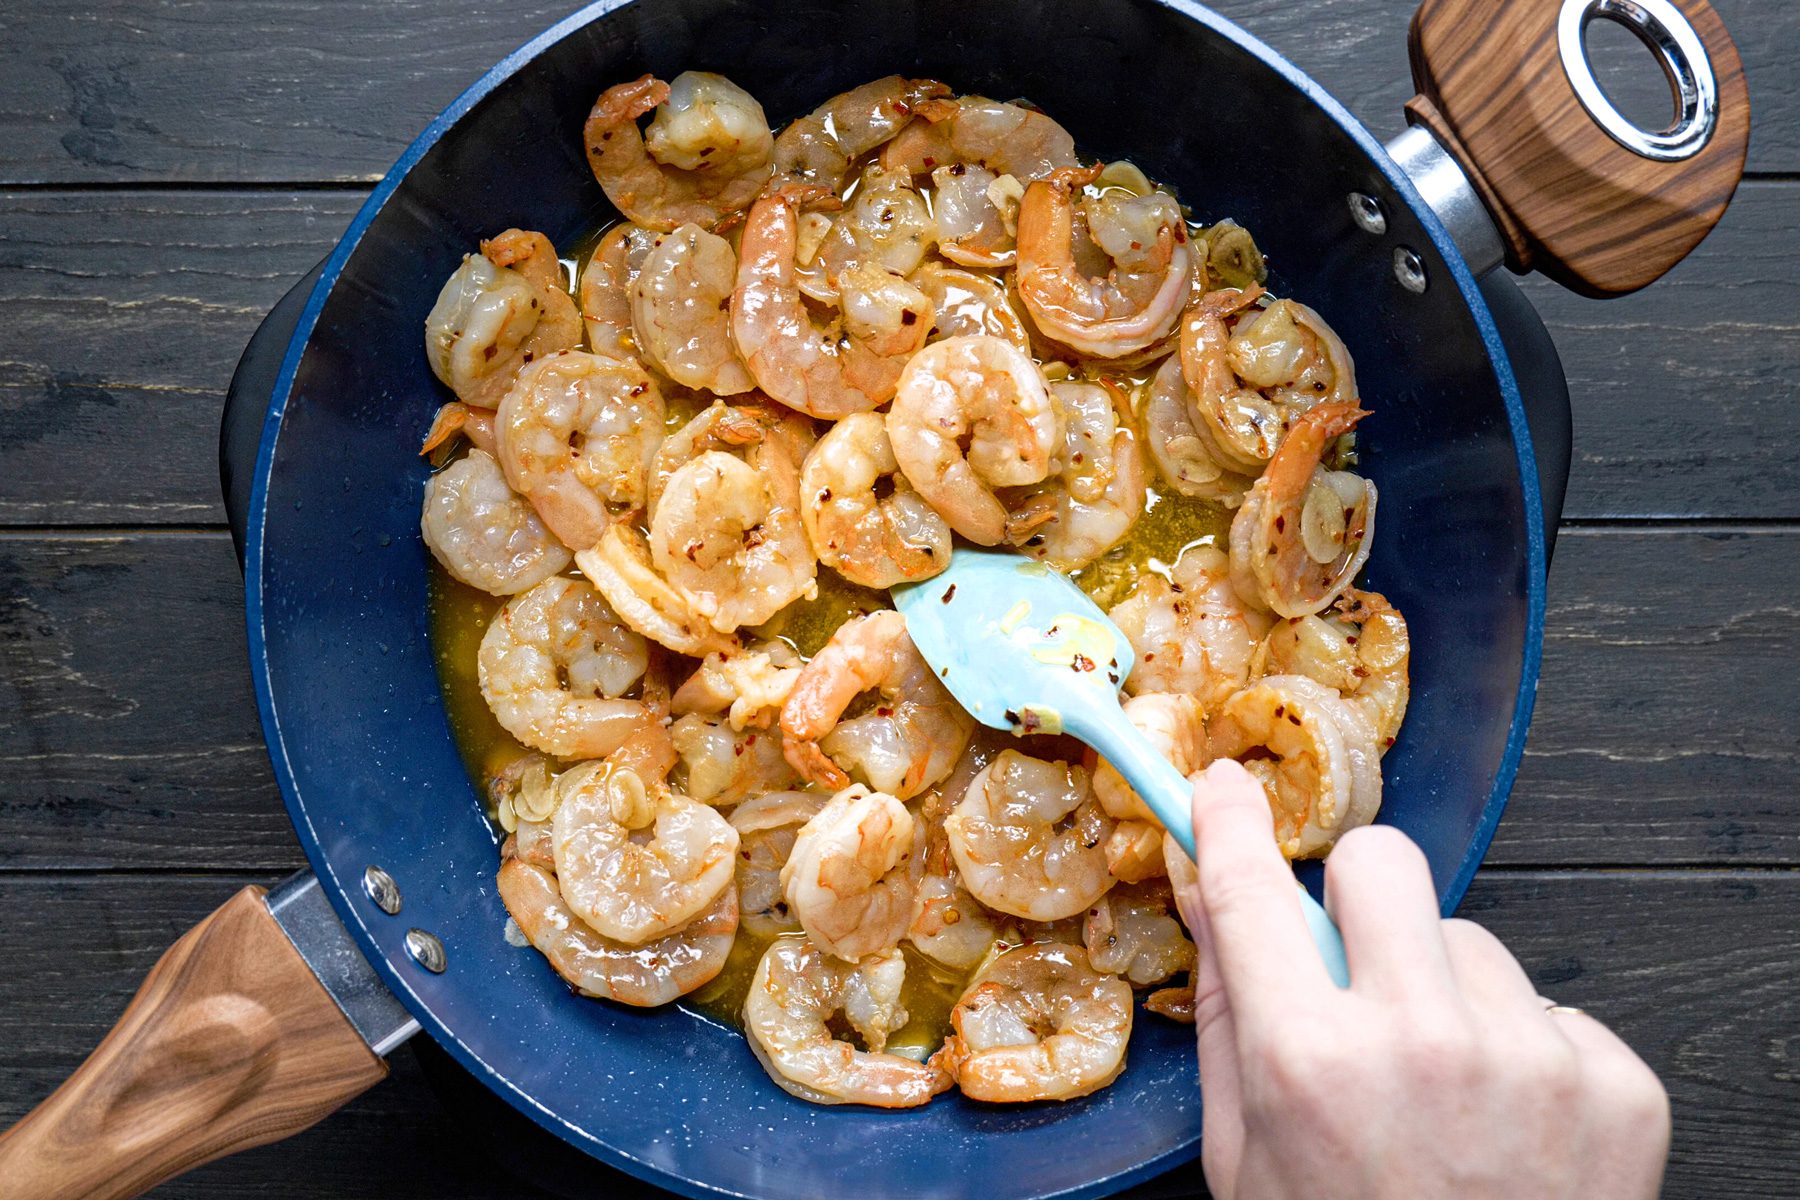 A person cooking shrimp in a large saucepan